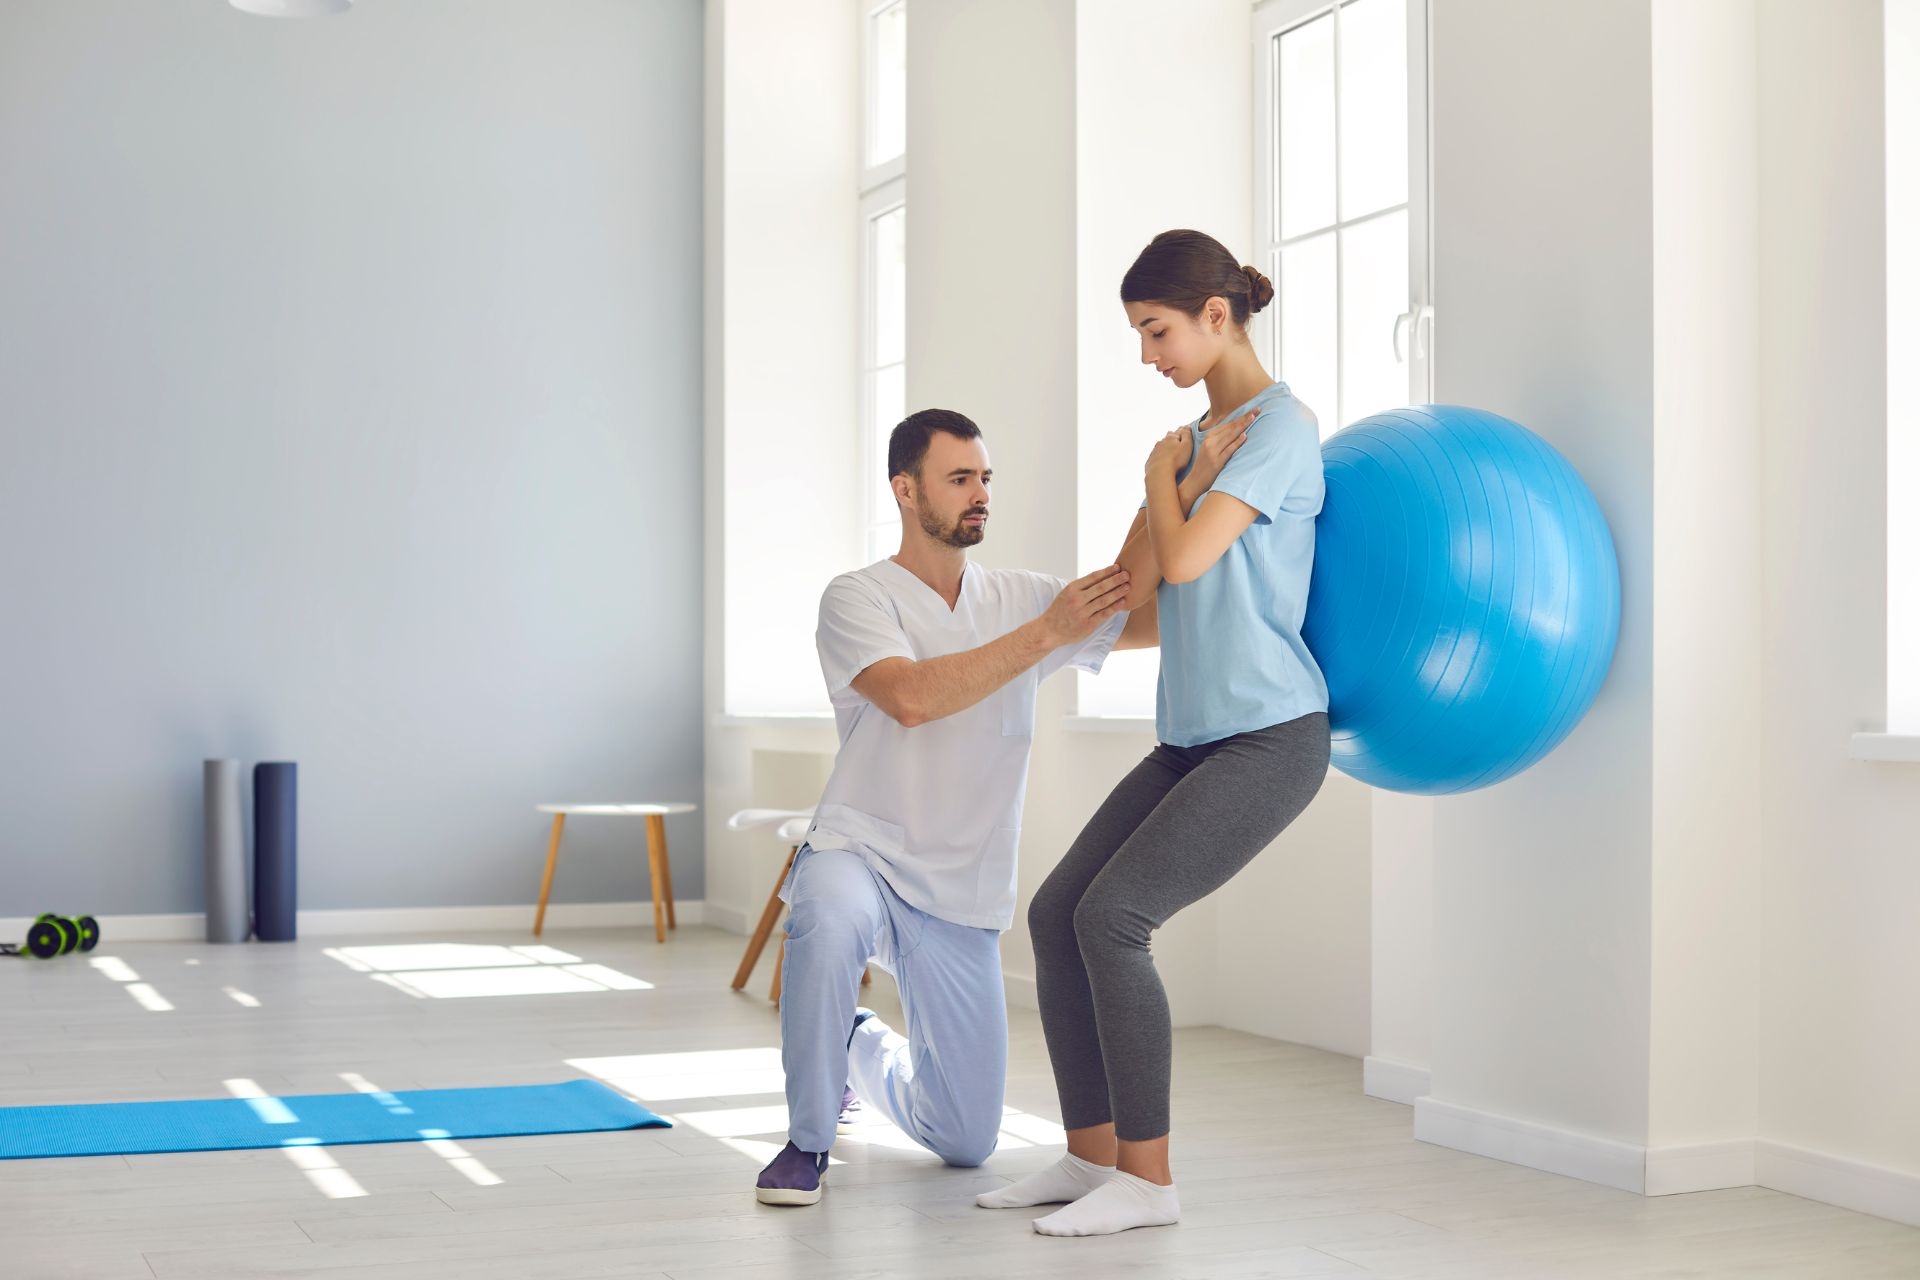 Are there any specific exercises or equipment used in adapted Pilates sessions?